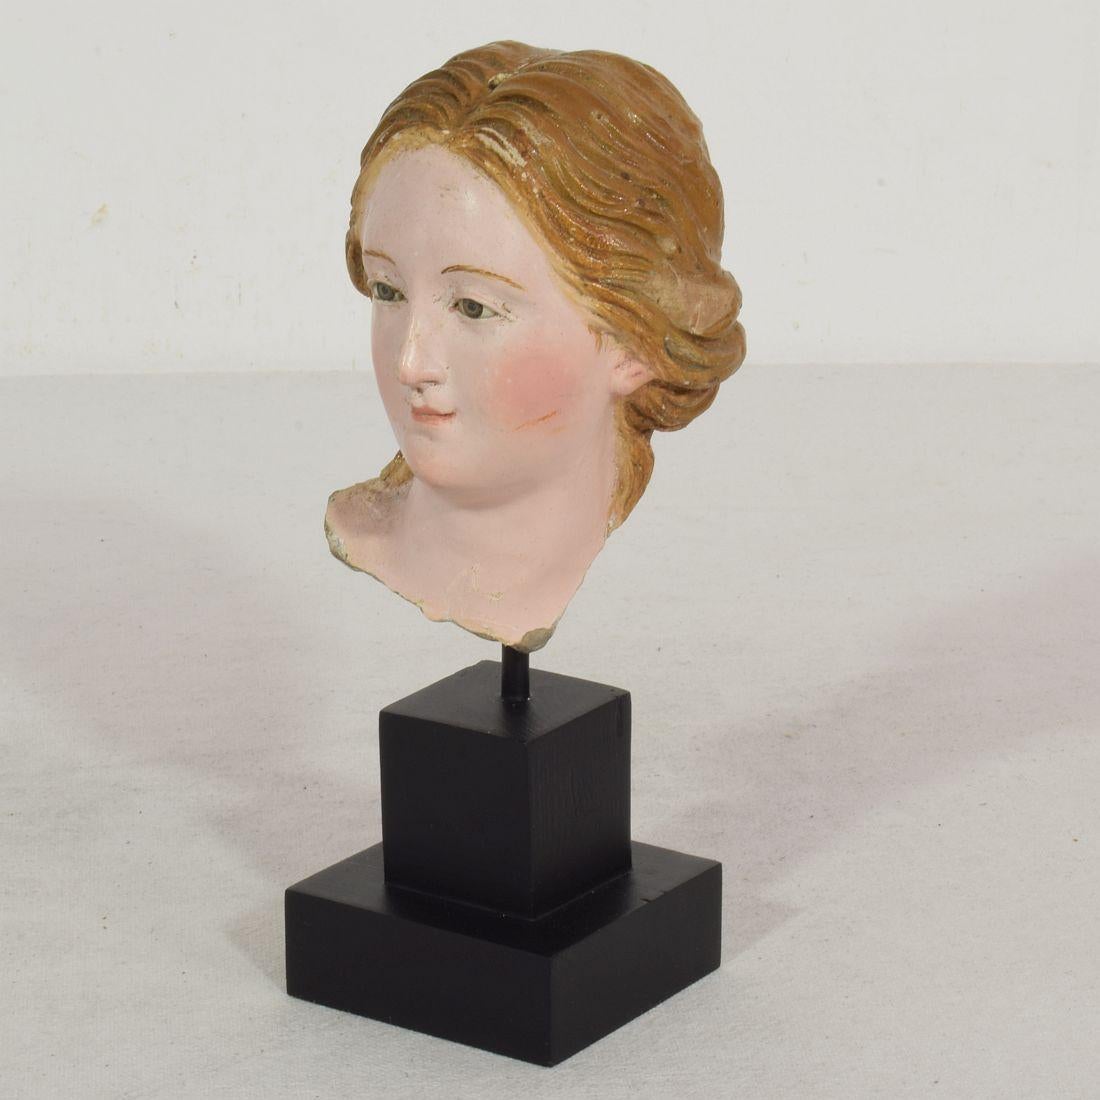 Stunning handcrafted terracotta head fragment of a Madonna with beautiful expression and glass eyes,
Italy, circa 1750-1800. Beautiful example of 18th century craftsmanship.
Weathered and small losses.
Measurement here below is inclusive the